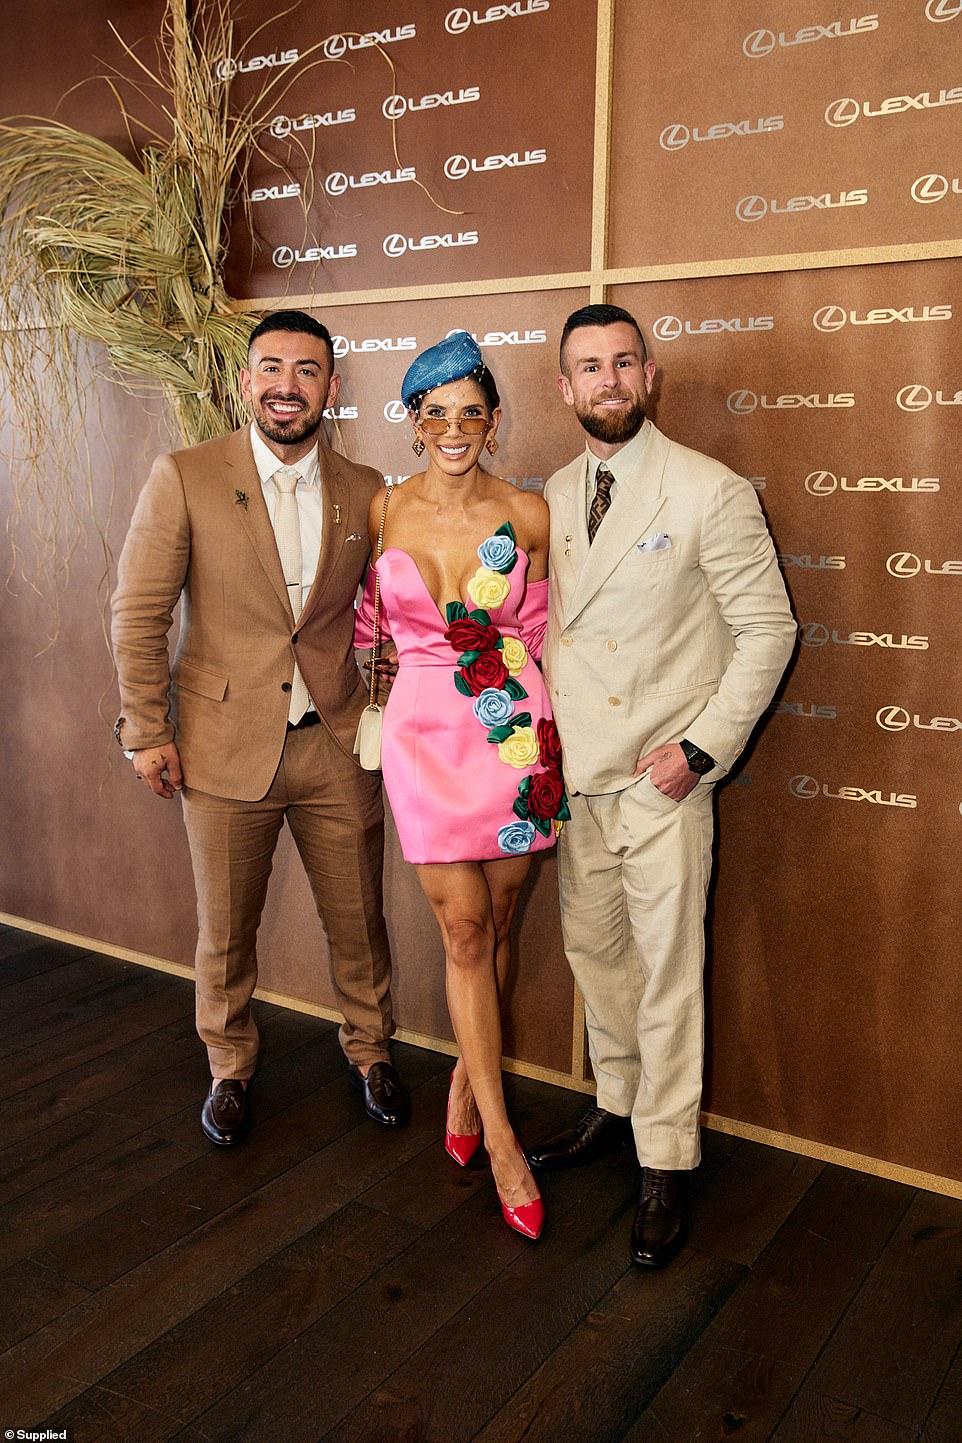 ACERO gym co-founder Amy Castano meanwhile stunned in a pink frock embellished with colourful flowers. She posed for photos arm-in-arm with her ex-husband and ACERO gym co-founder Jono Castano (left) and her soccer star boyfriend Aaron Evans (right)